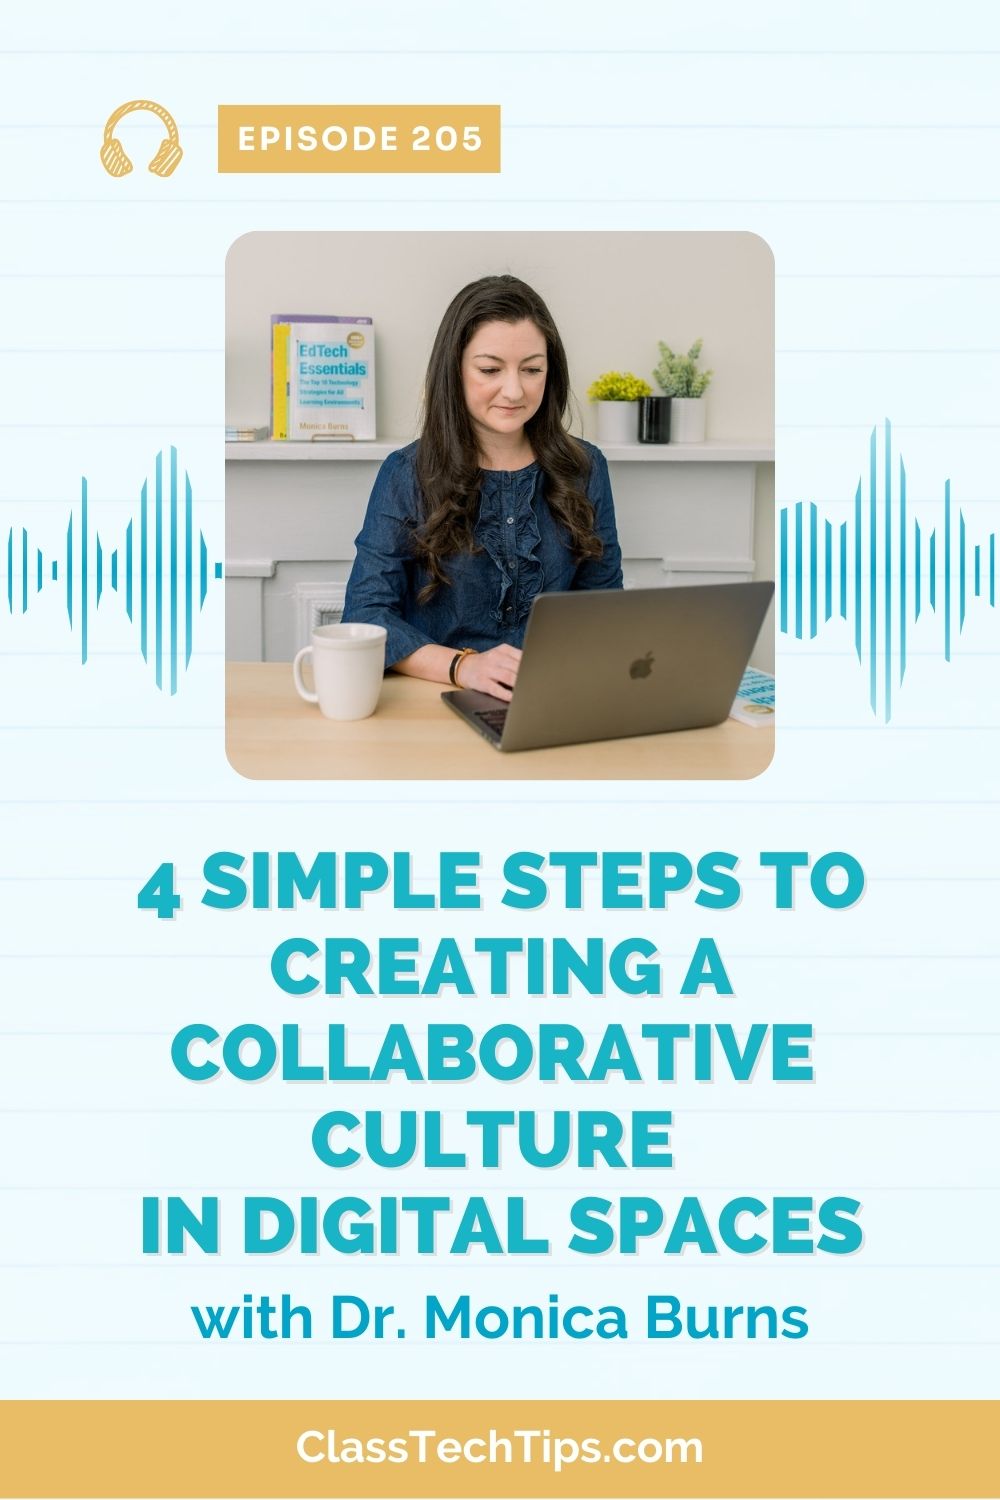 4 Simple Steps to Creating a Collaborative Culture in Digital Spaces - Vertical